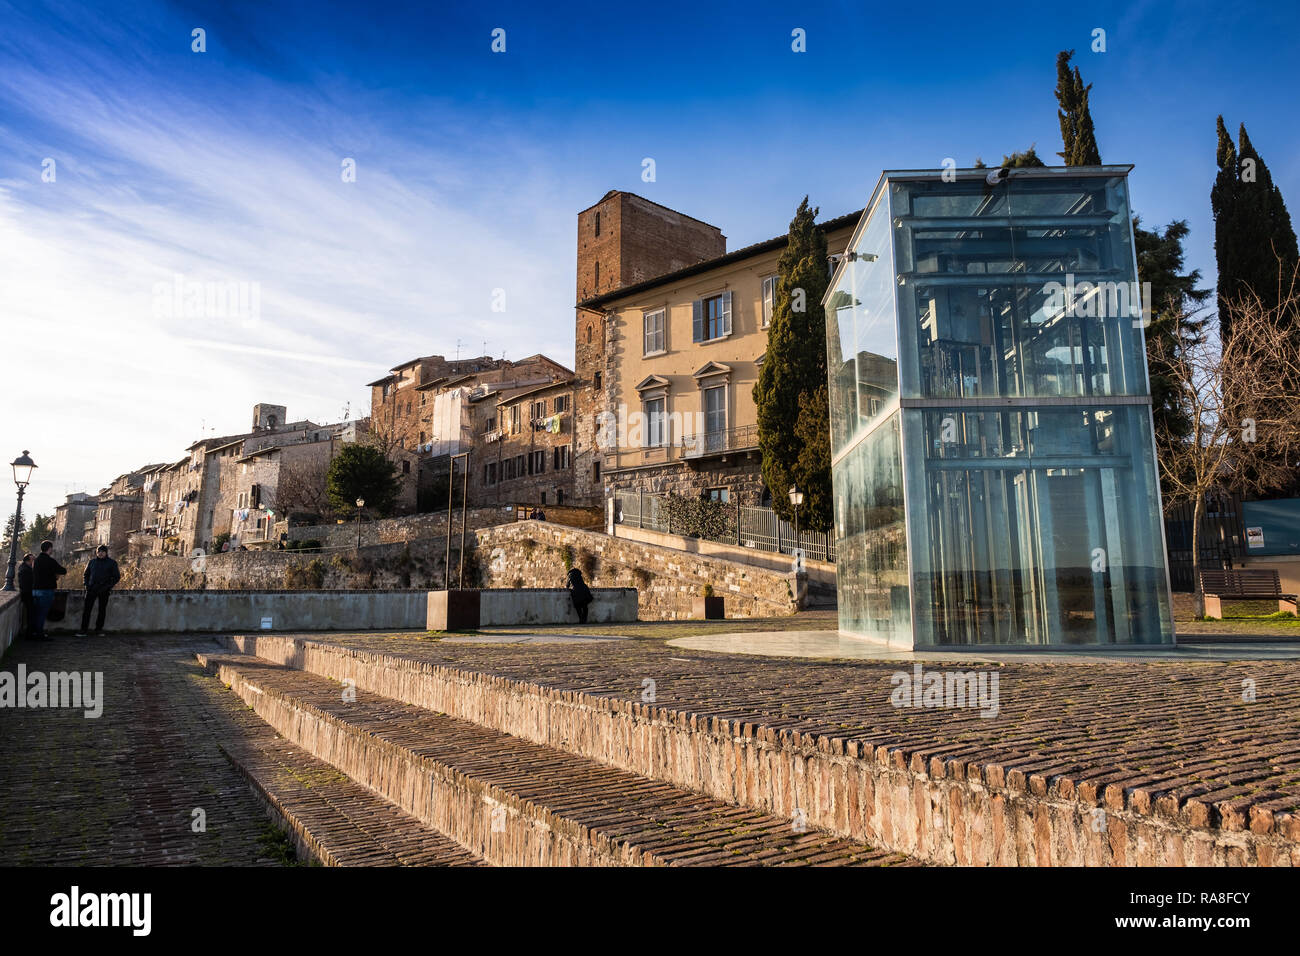 COLLE VAL D’ELSA, ITALY - DECEMBER 26, 2018: Two unknown people. The Baluardi with its crystal lift offer a panoramic view of the city in the historic Stock Photo